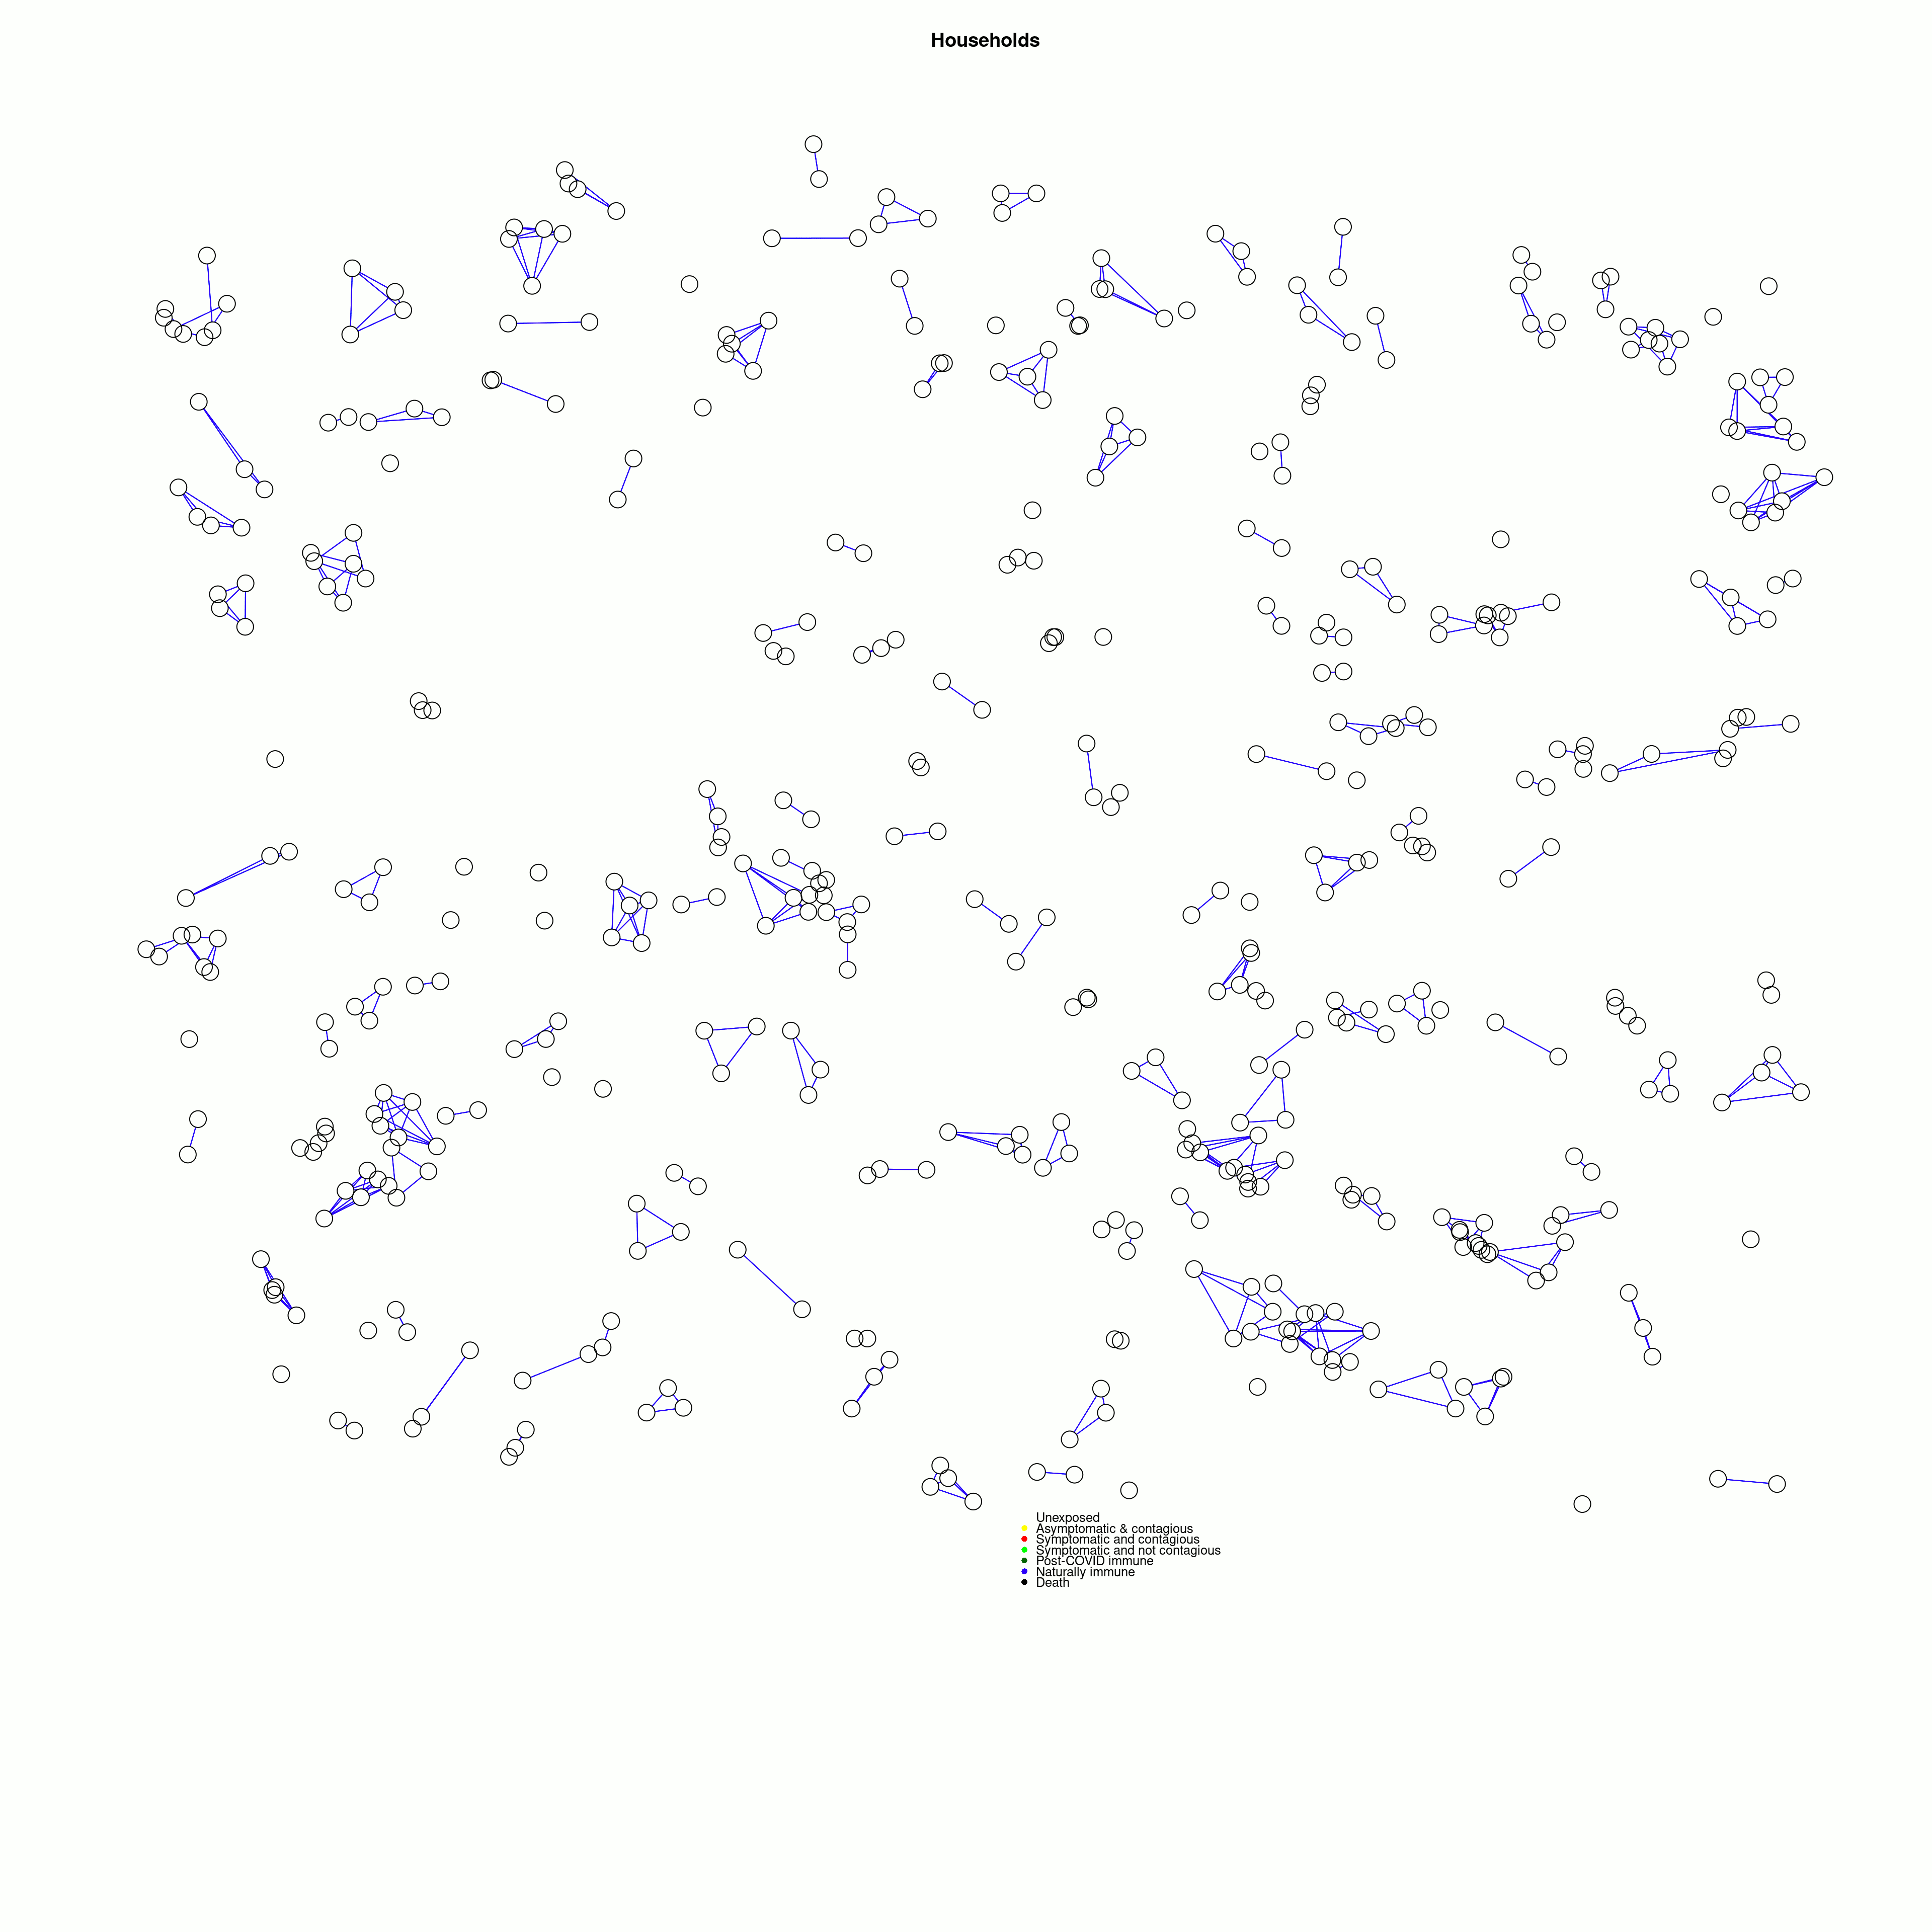 Simulation of extra-network vacationers entering the network